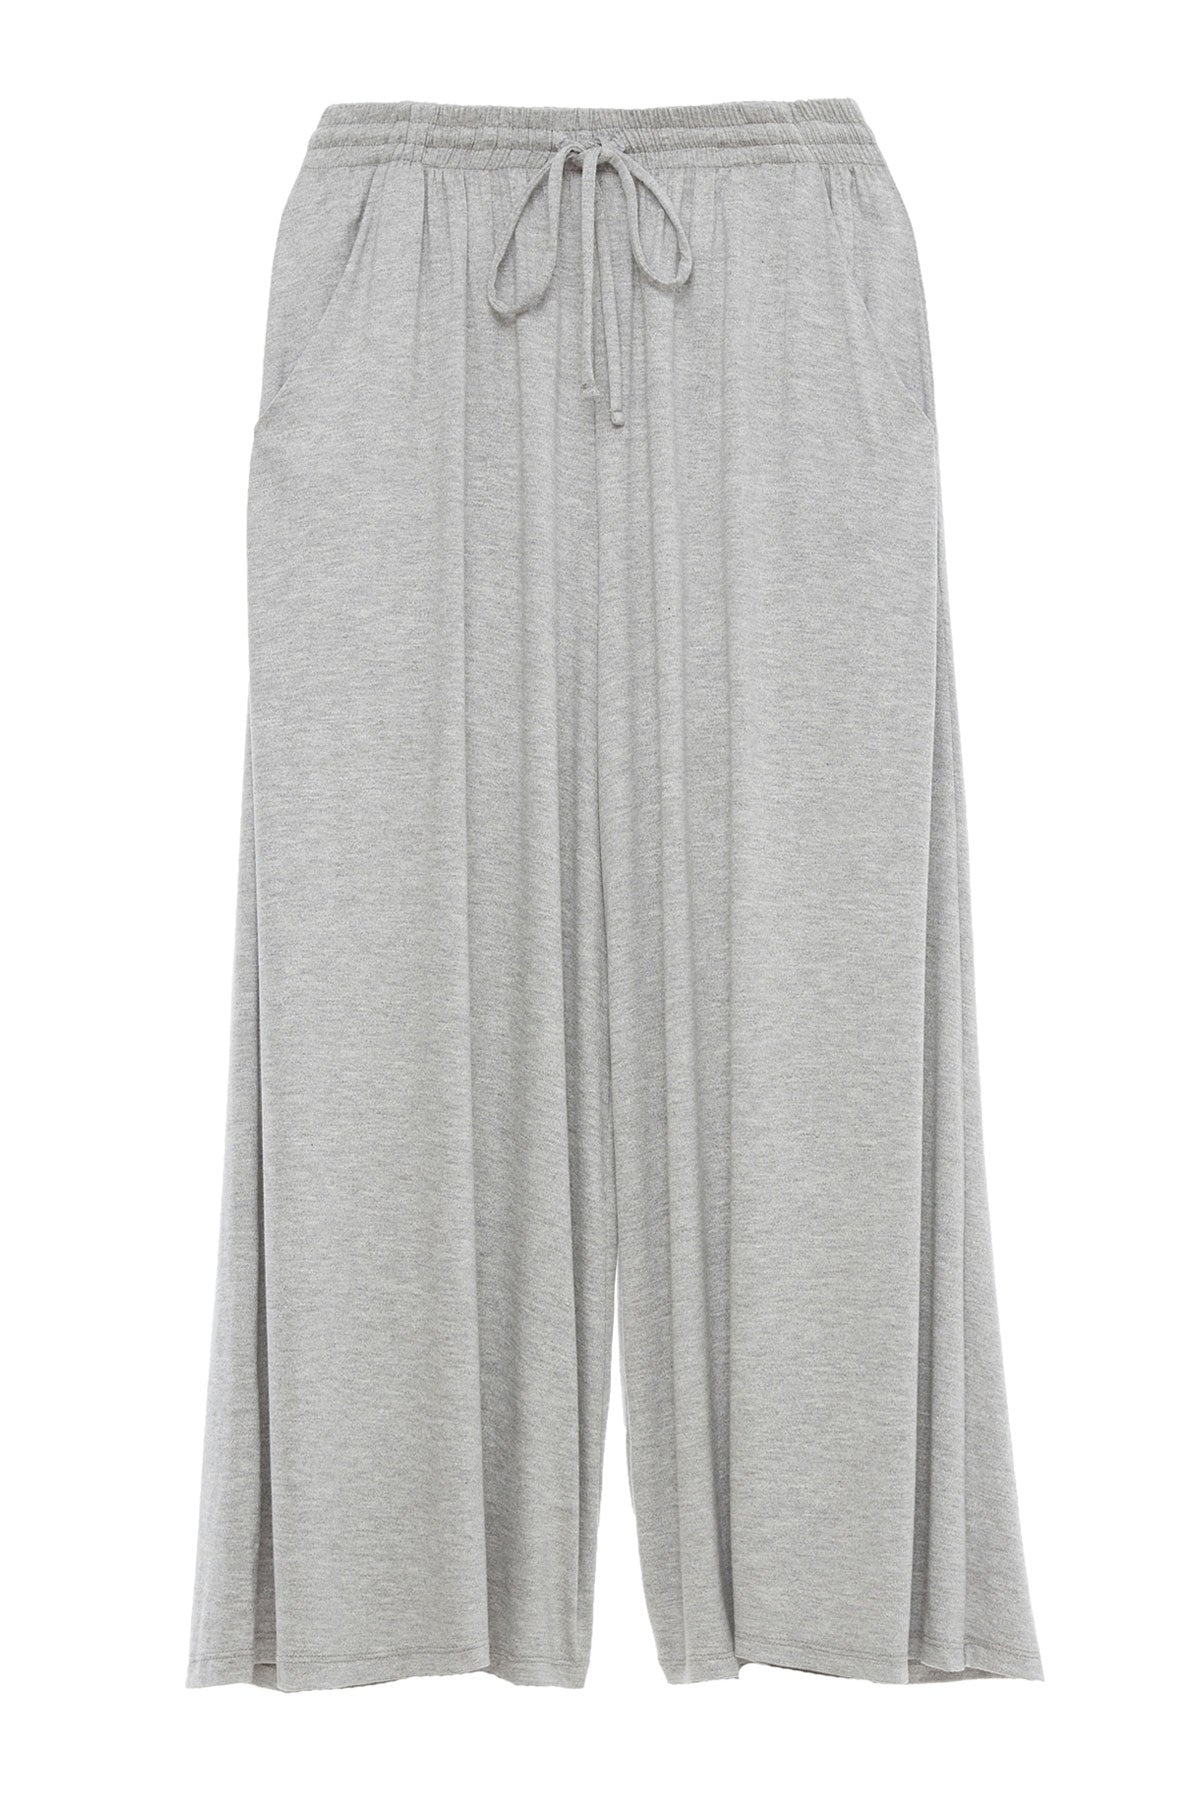 Darby Cropped Wide Leg Pant Heather Grey - shop-olivia.com